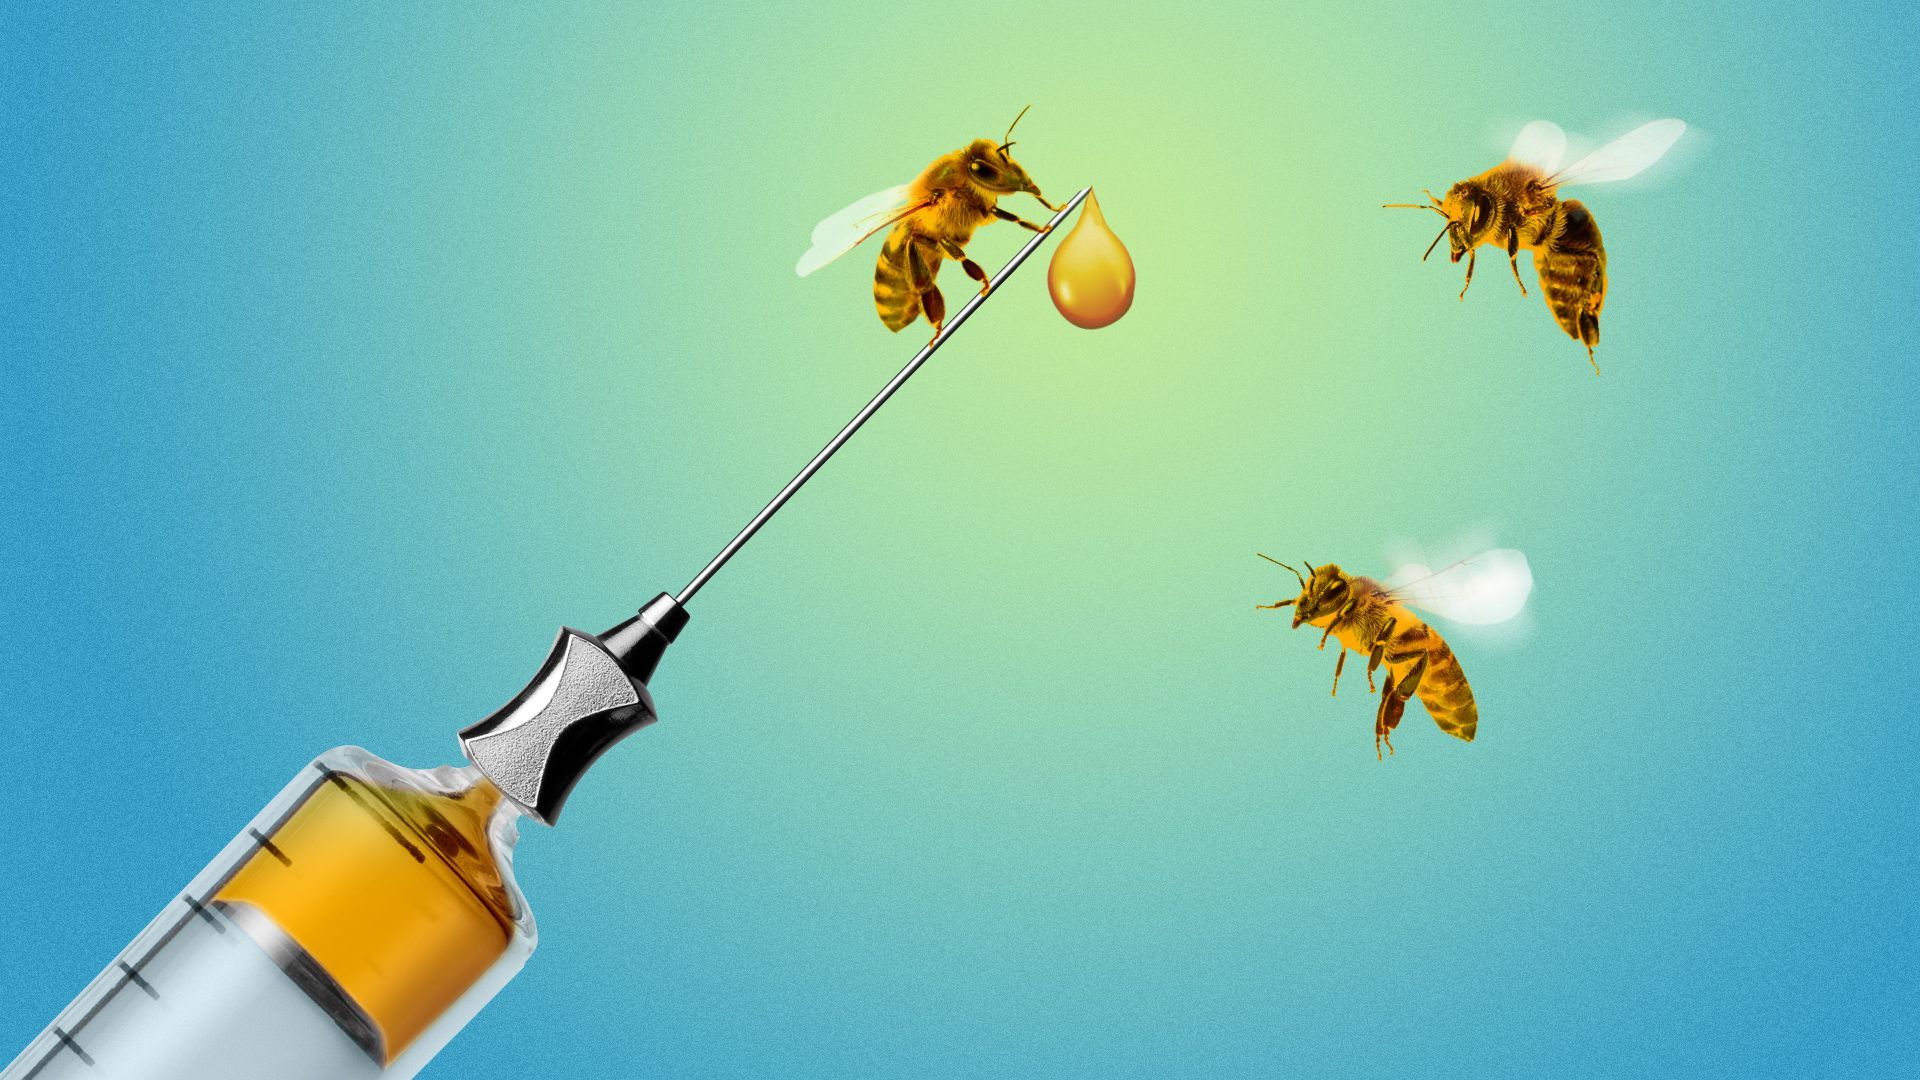 Illustration of honey bees buzzing around a syringe with a droplet of vaccine. 